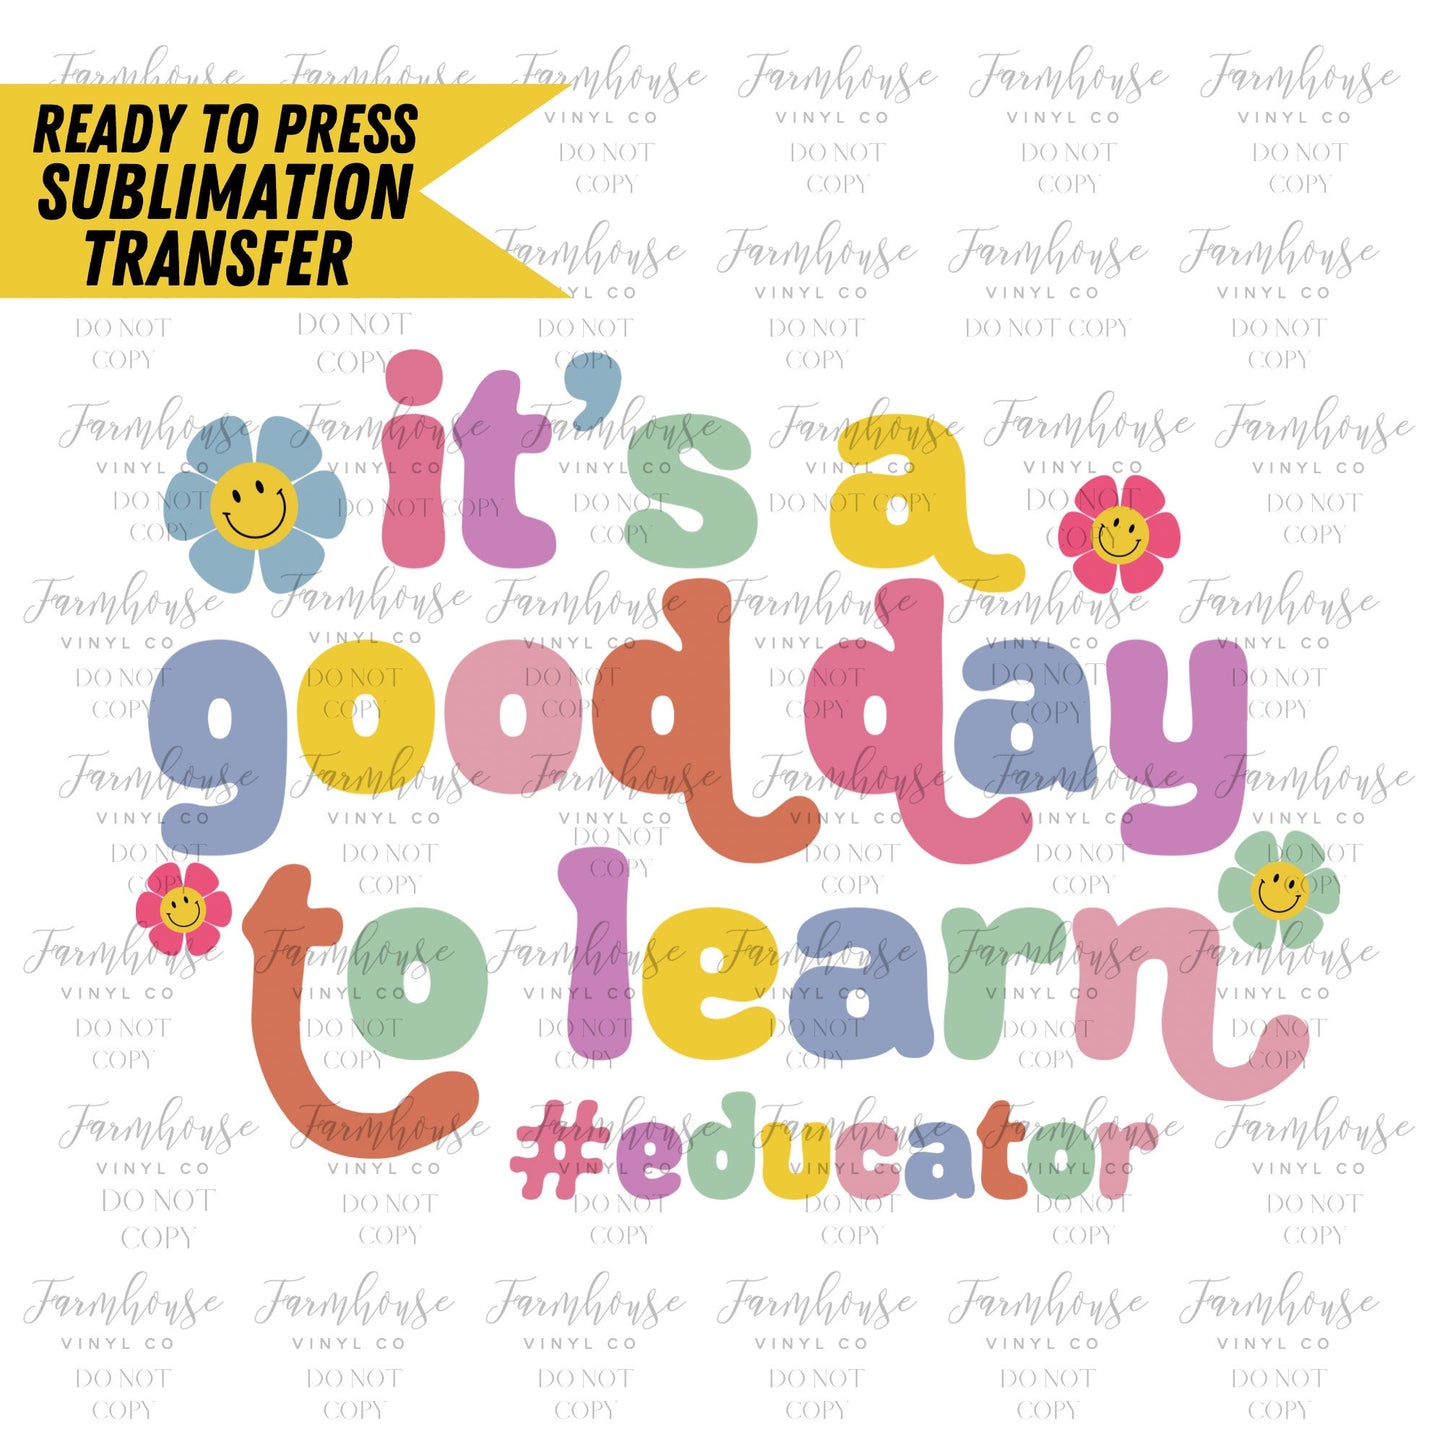 It's A Good Day to Learn, Ready to Press Sublimation Transfer, Sublimation Transfer, Heat Transfer, Trending Graphic 22-23, Retro School - Farmhouse Vinyl Co